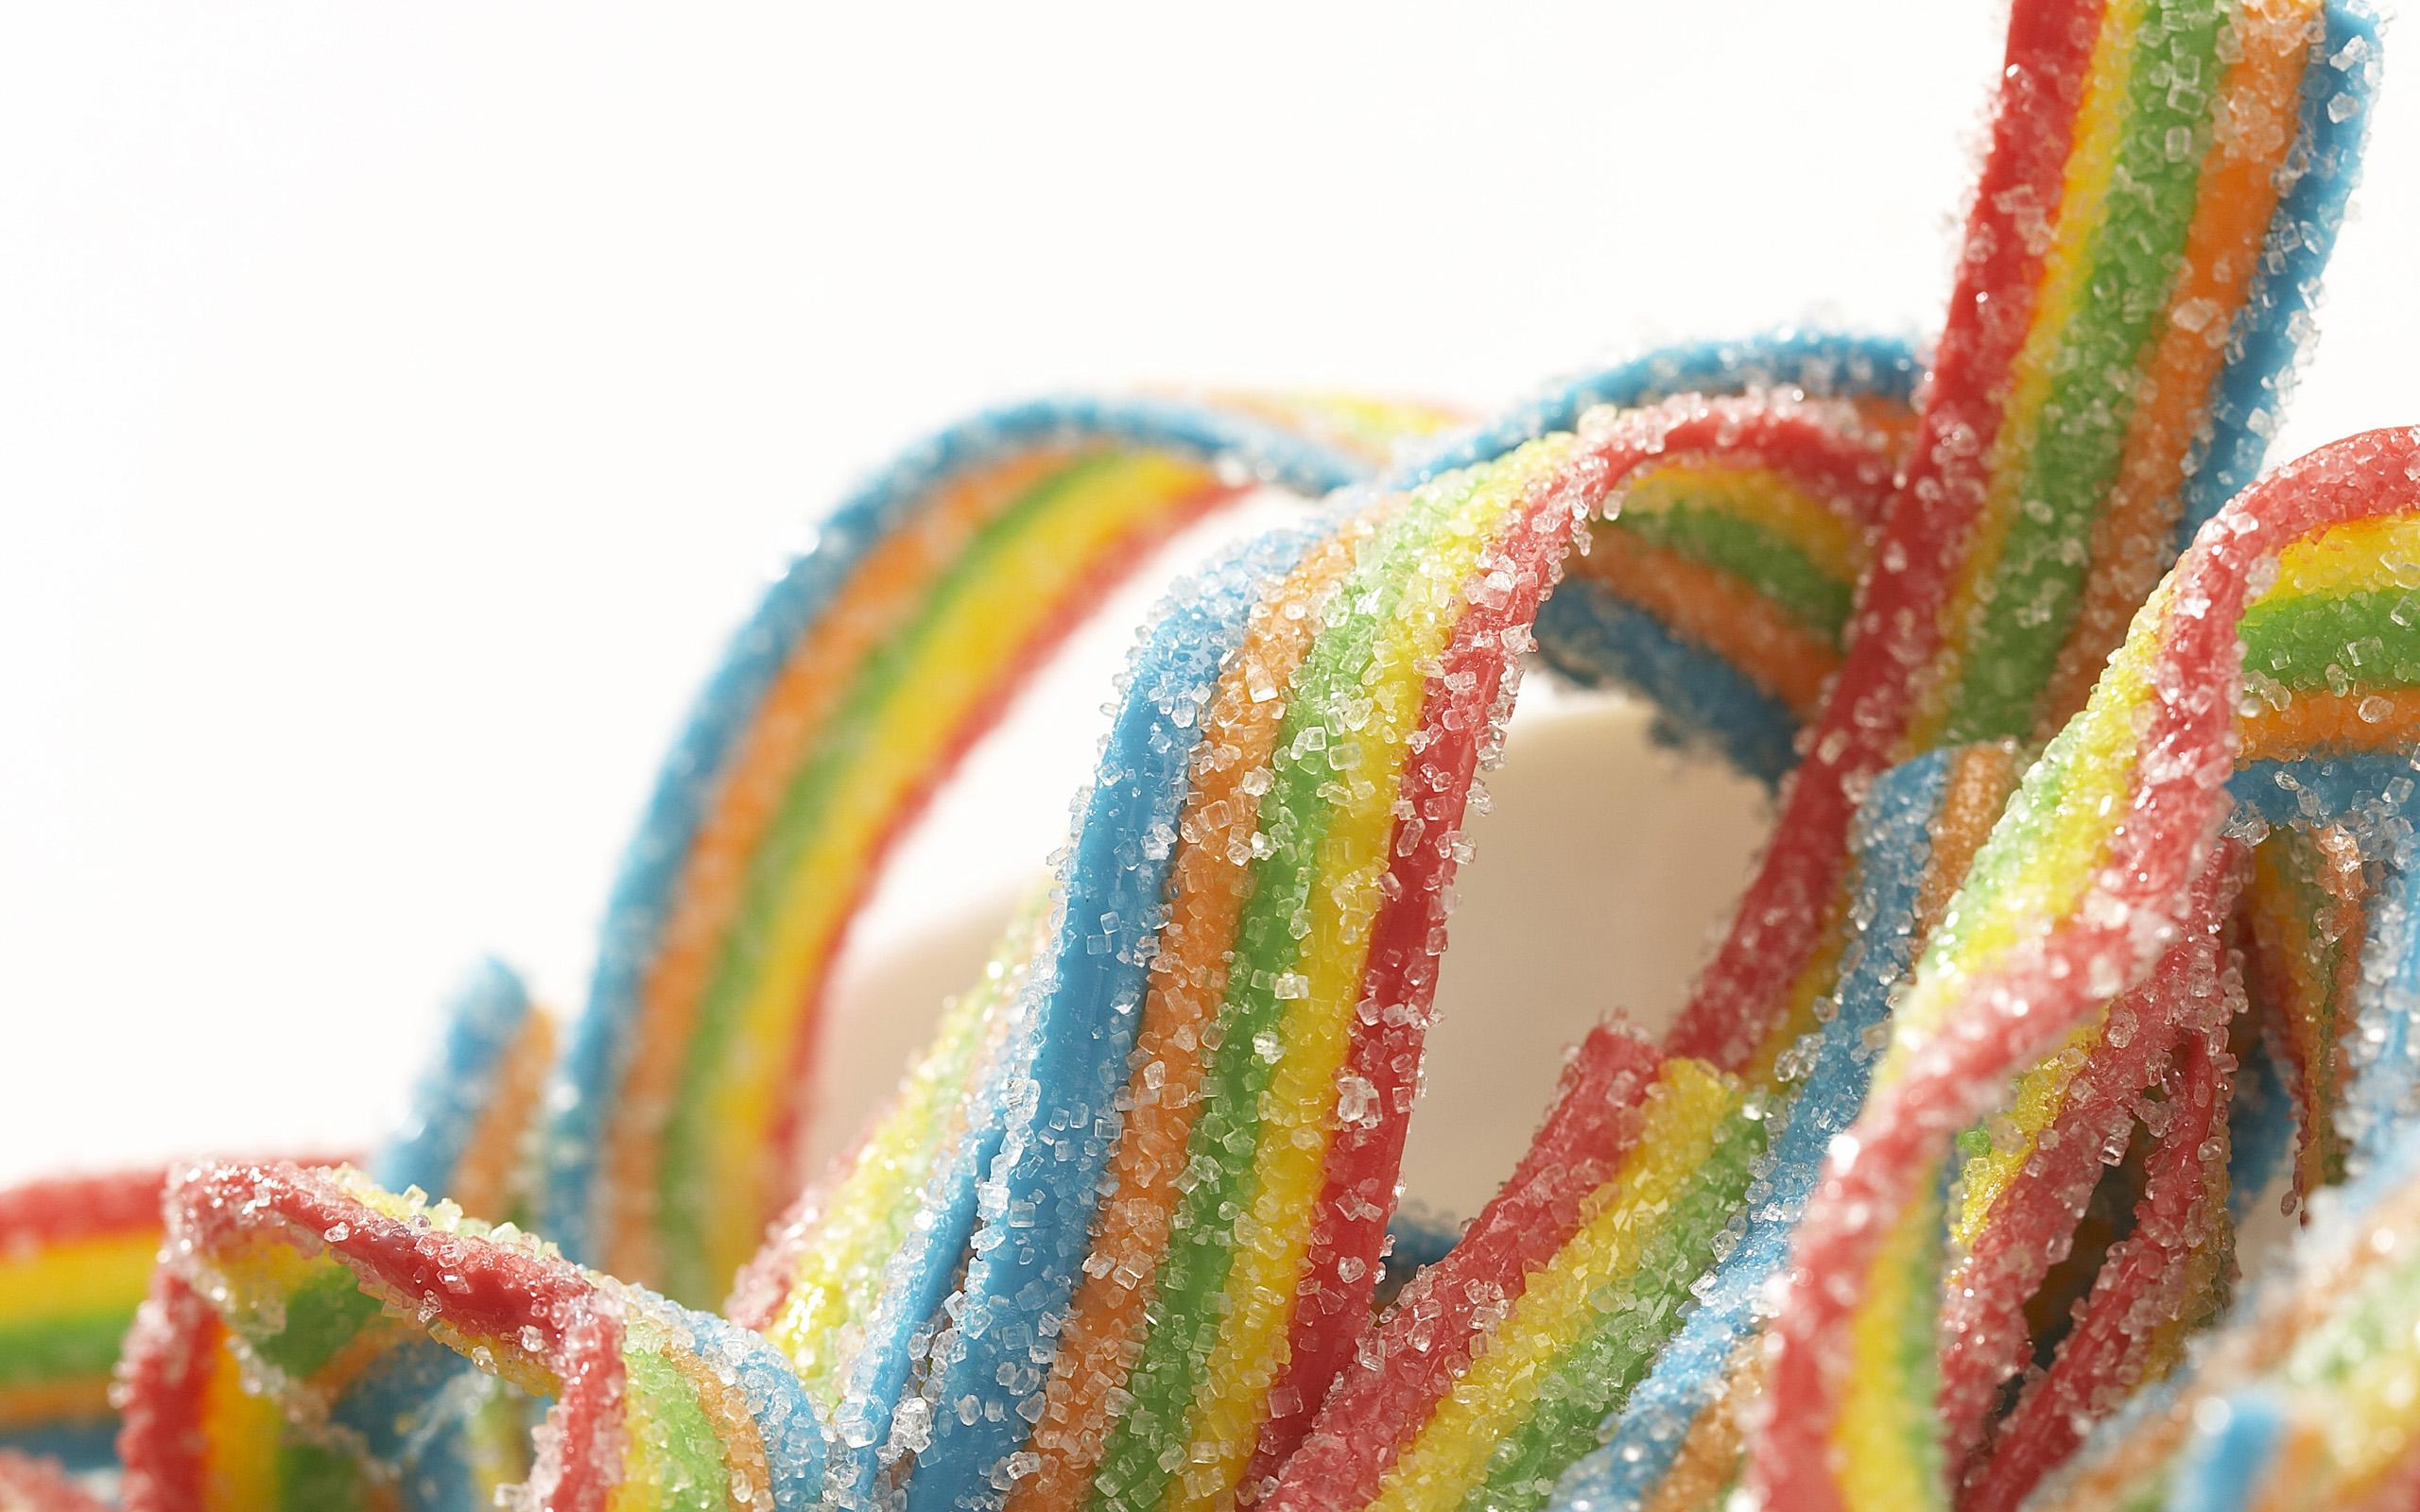 Rainbow Sugar Candy wallpaper. food and drink